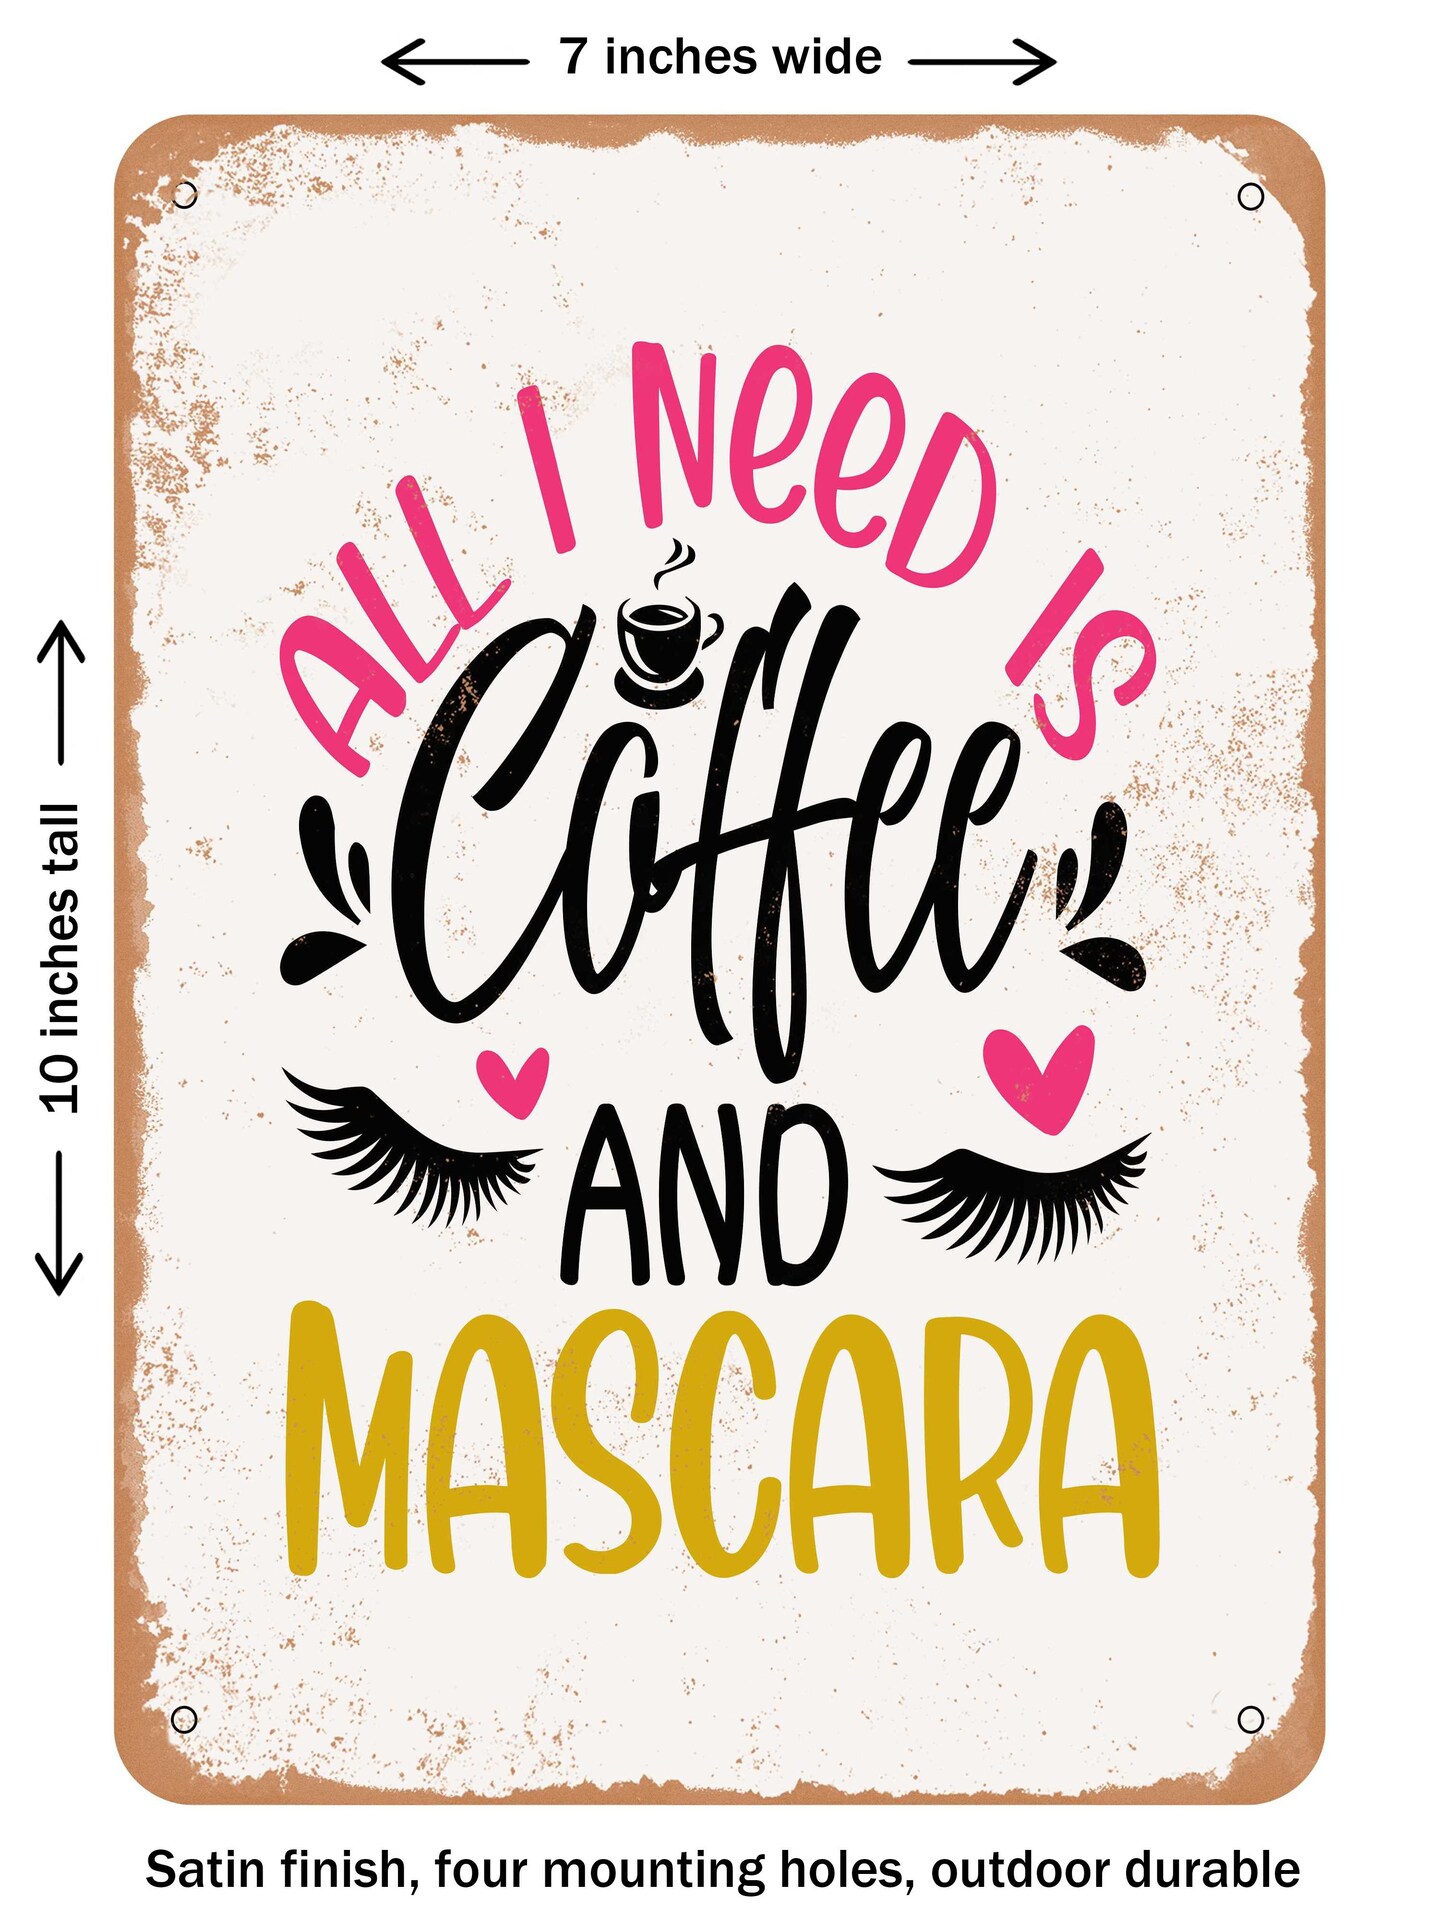 DECORATIVE METAL SIGN - All I Need is Coffee and Mascara  - Vintage Rusty Look